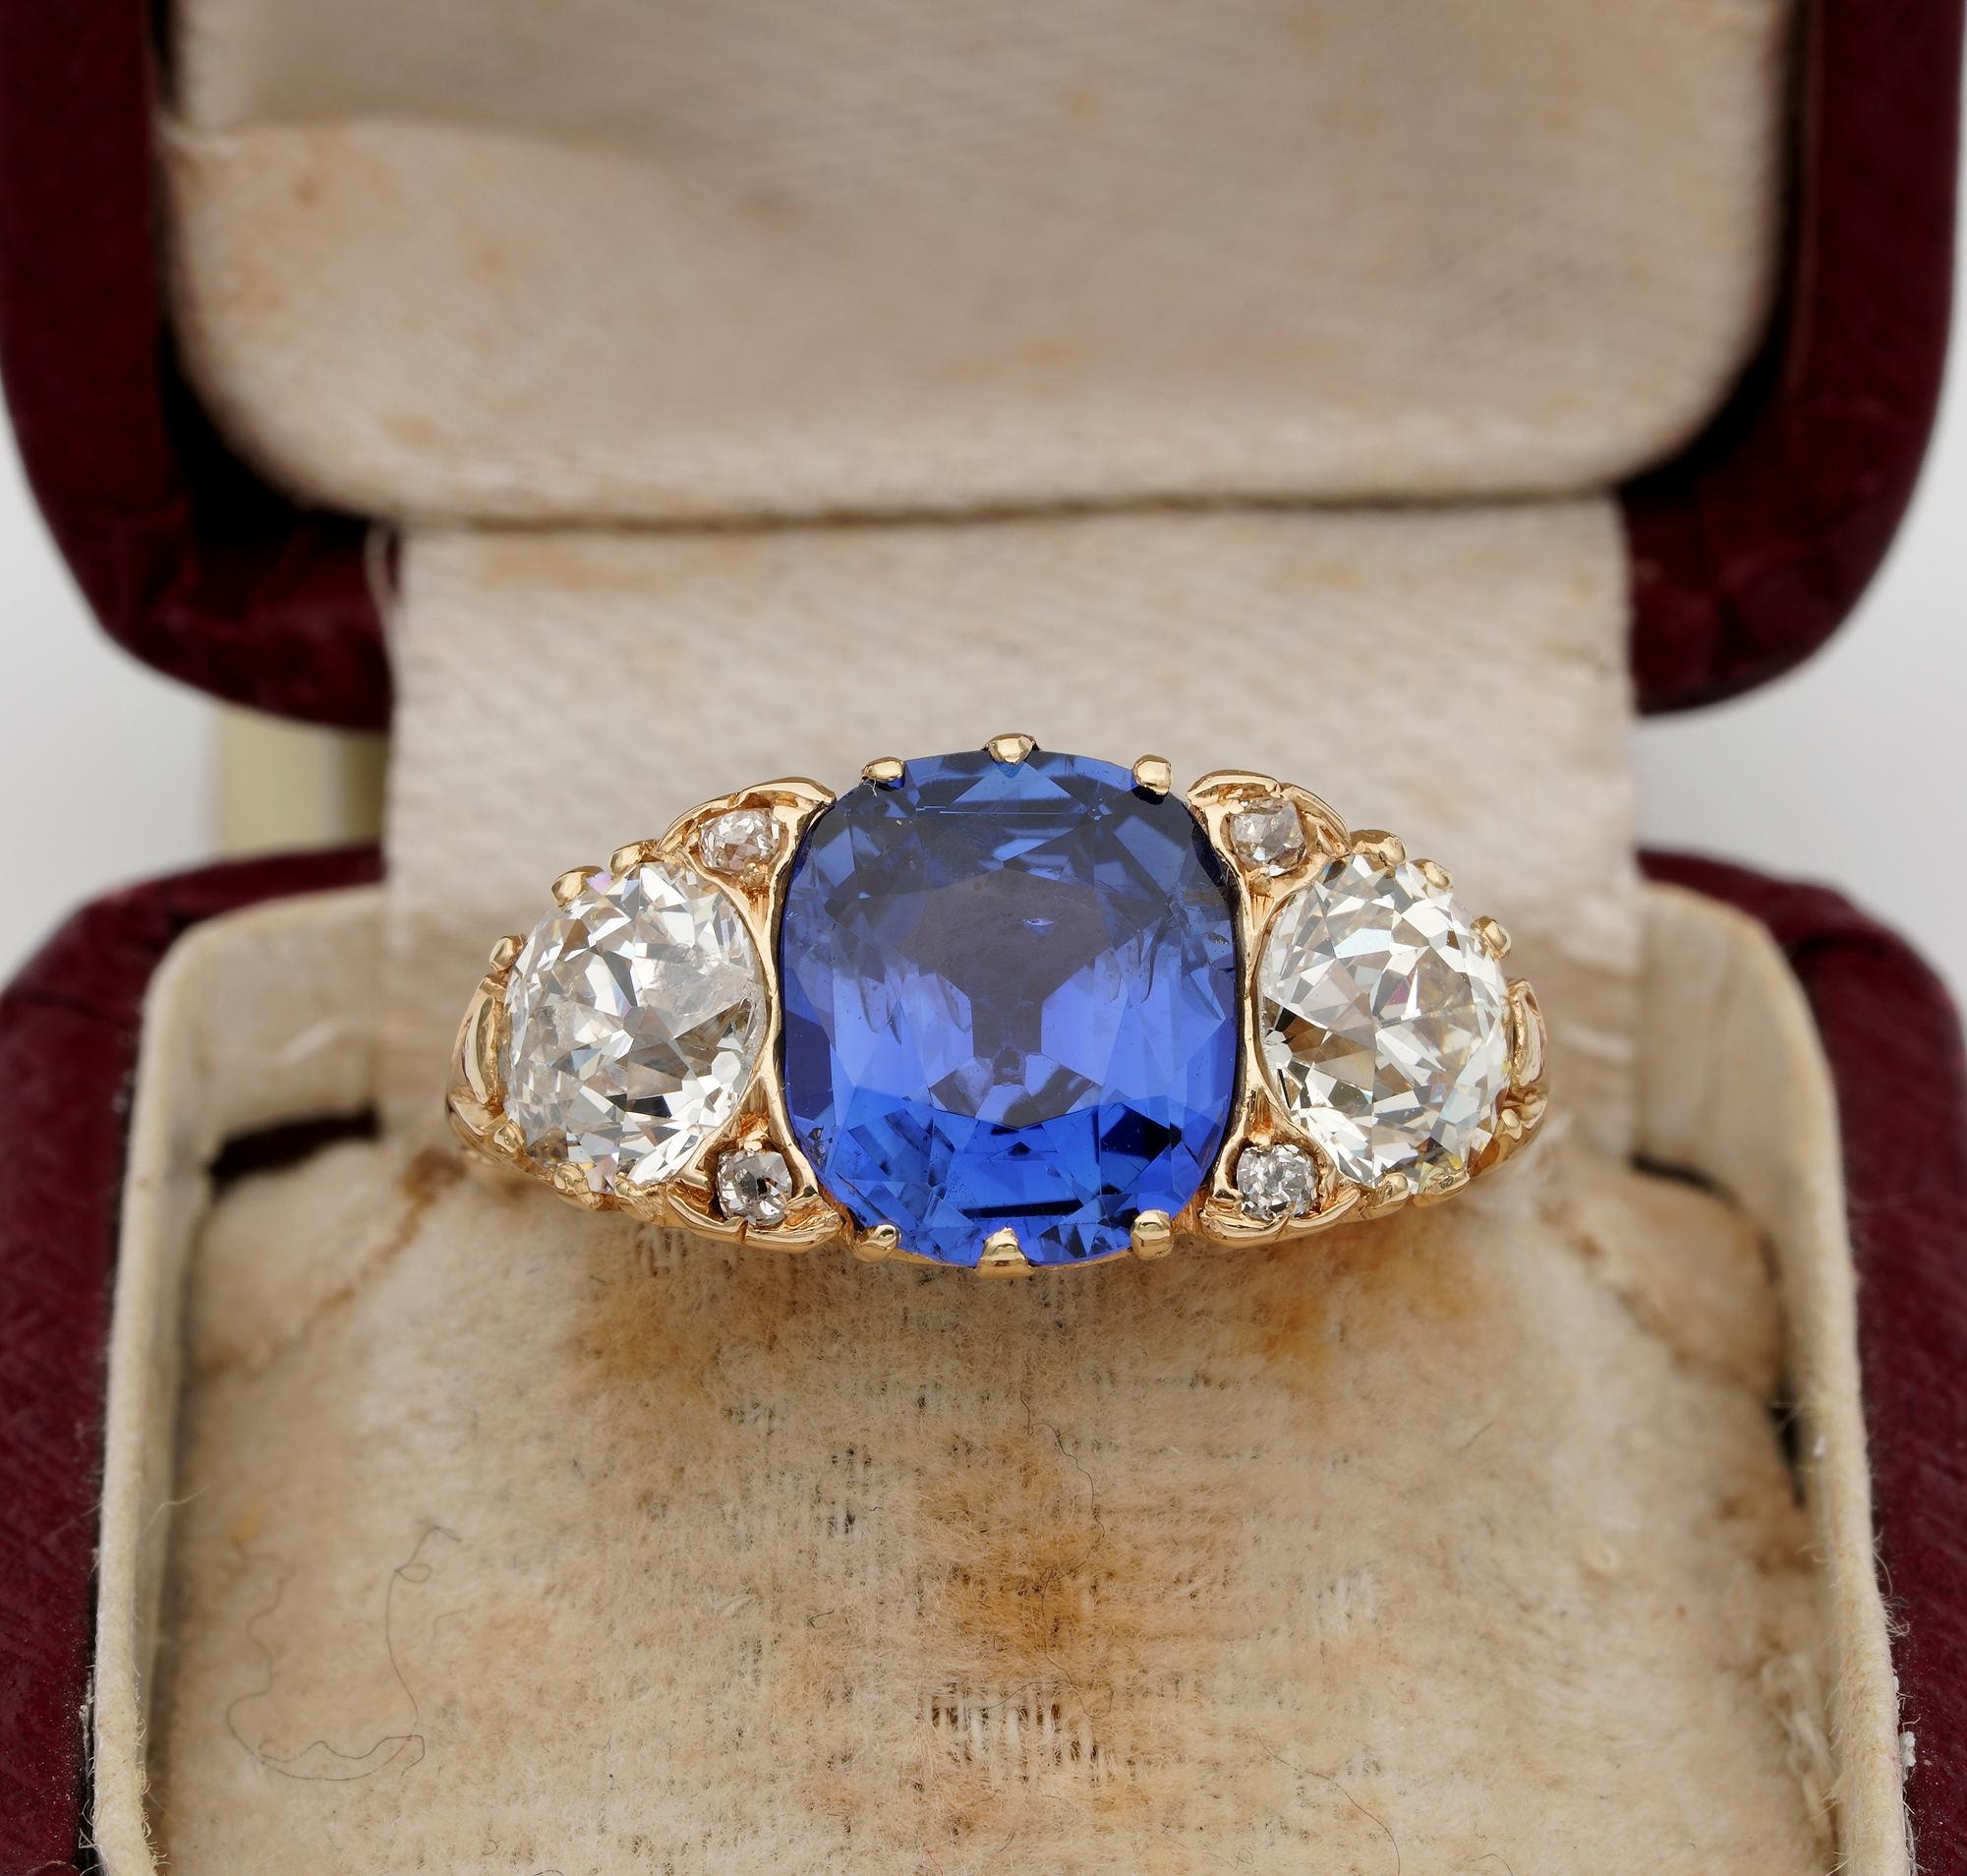 History on a Hand

Getting hold of durable values along with rare antiques for sure is building up your heirloom pieces for now and the future
This magnificent Edwardian period ring is a fantastic opportunity to acquire one of the finest trilogy